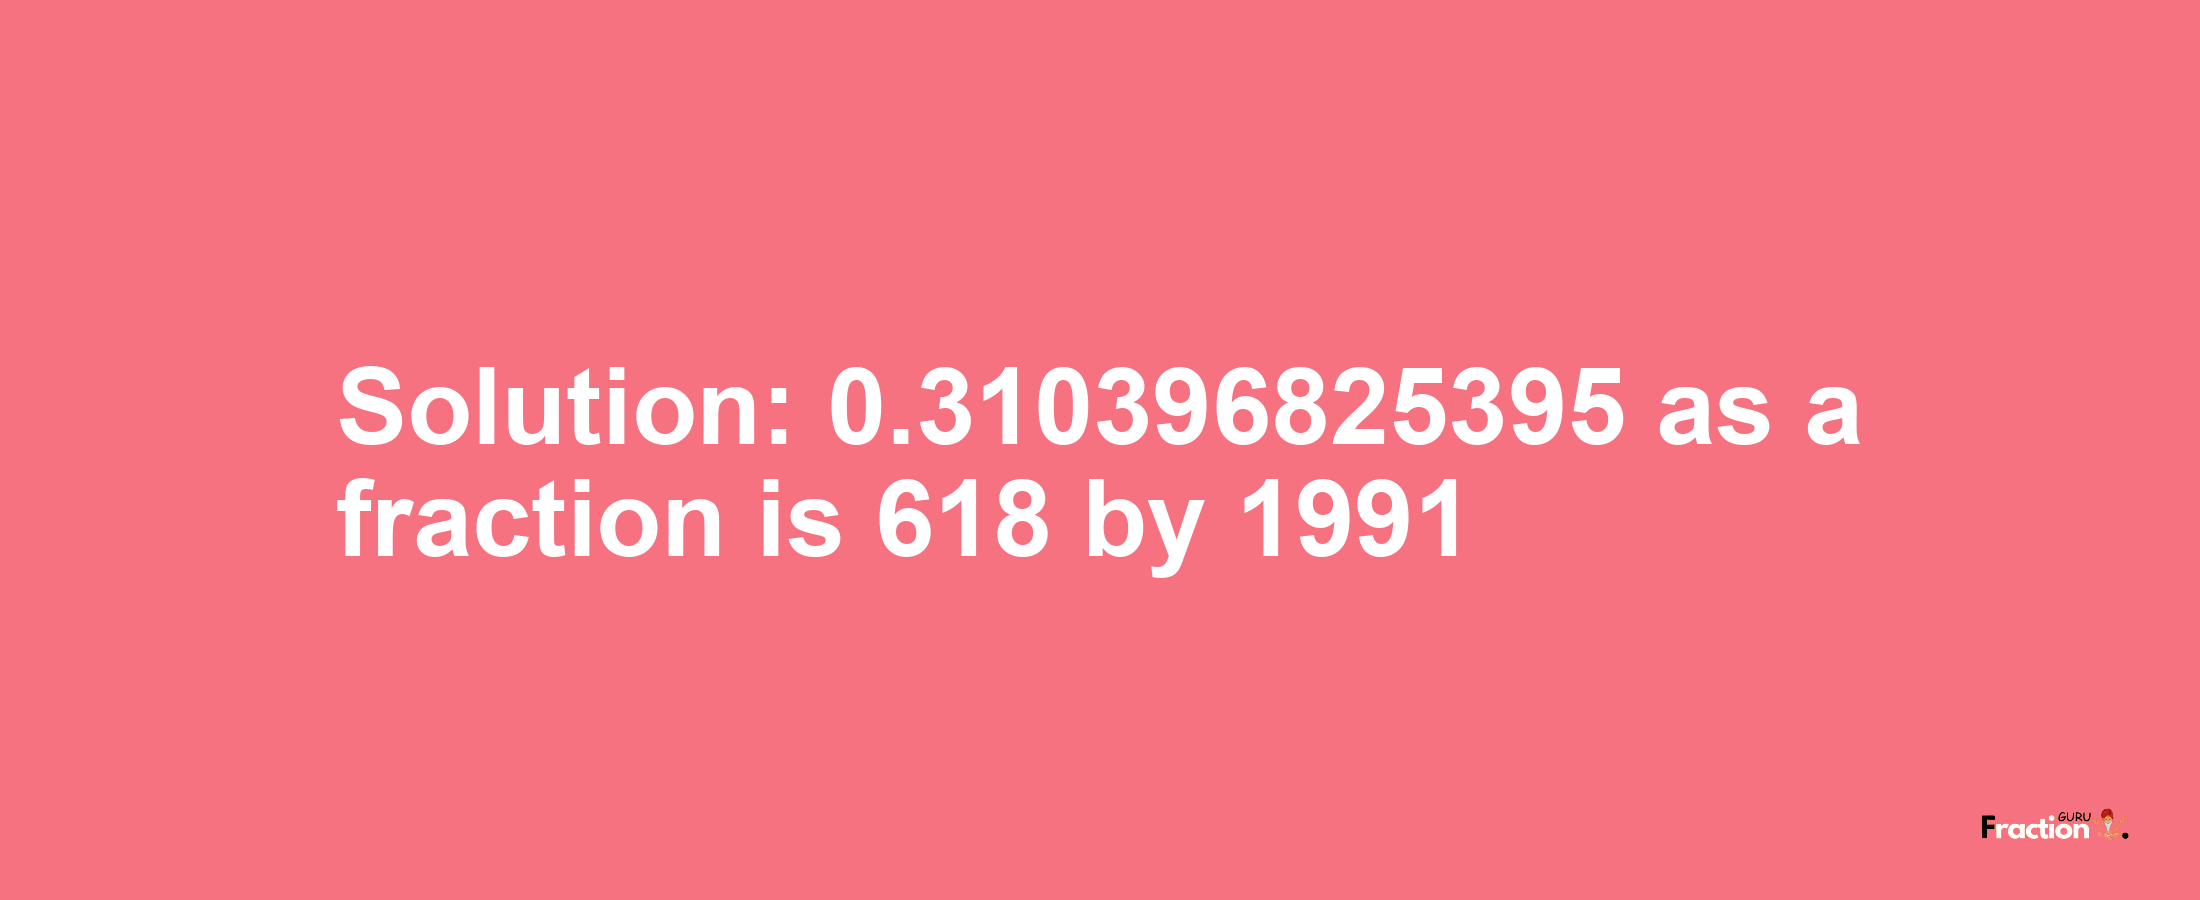 Solution:0.310396825395 as a fraction is 618/1991